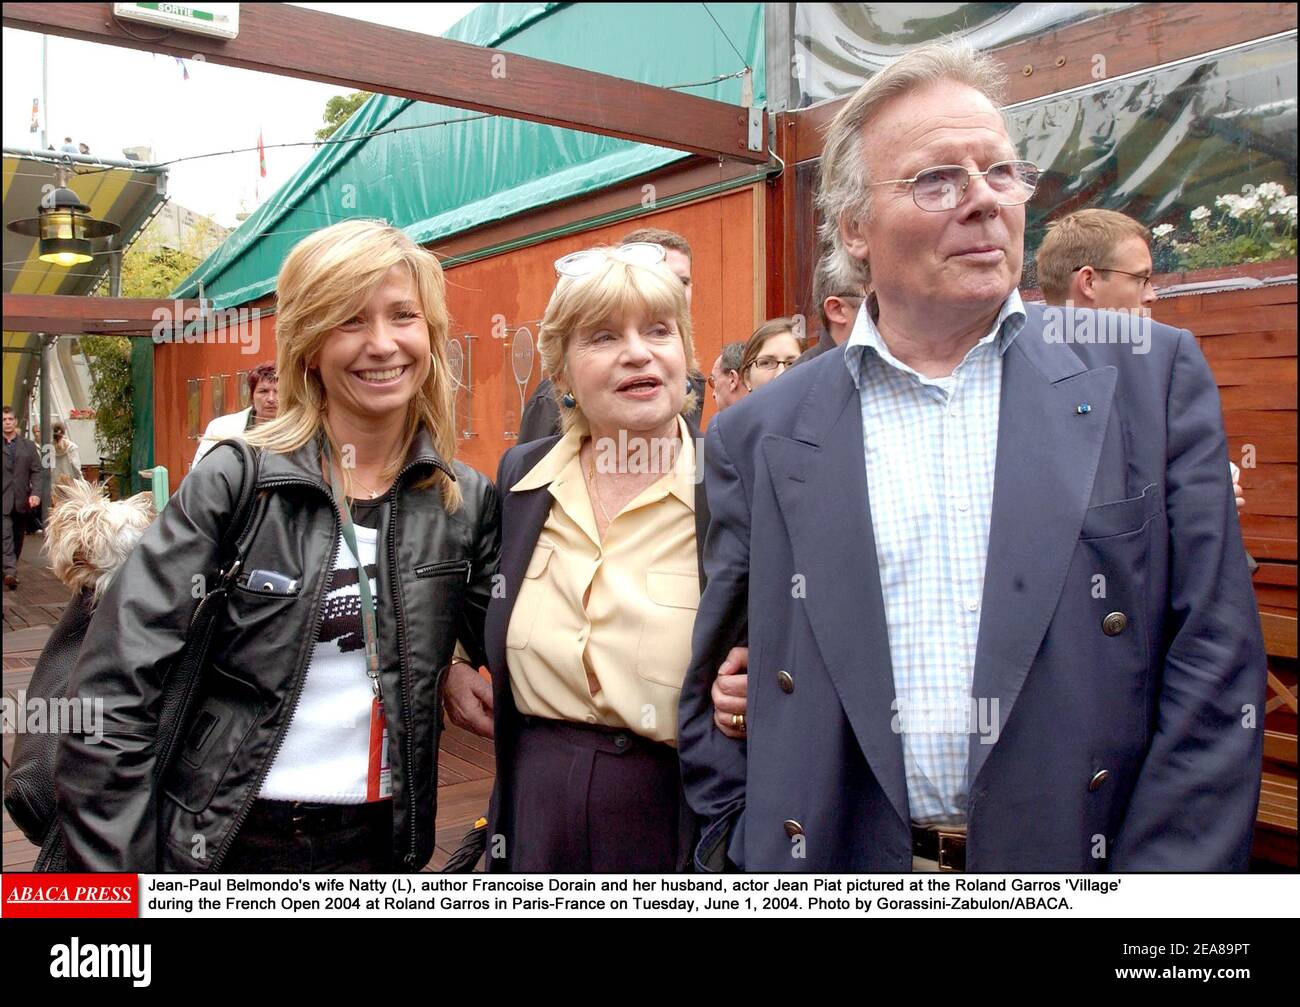 Jean-Paul Belmondo's wife Natty (L), author Francoise Dorin and her  husband, actor Jean Piat pictured at the Roland Garros 'Village' during the  French Open 2004 at Roland Garros in Paris-France on Tuesday,